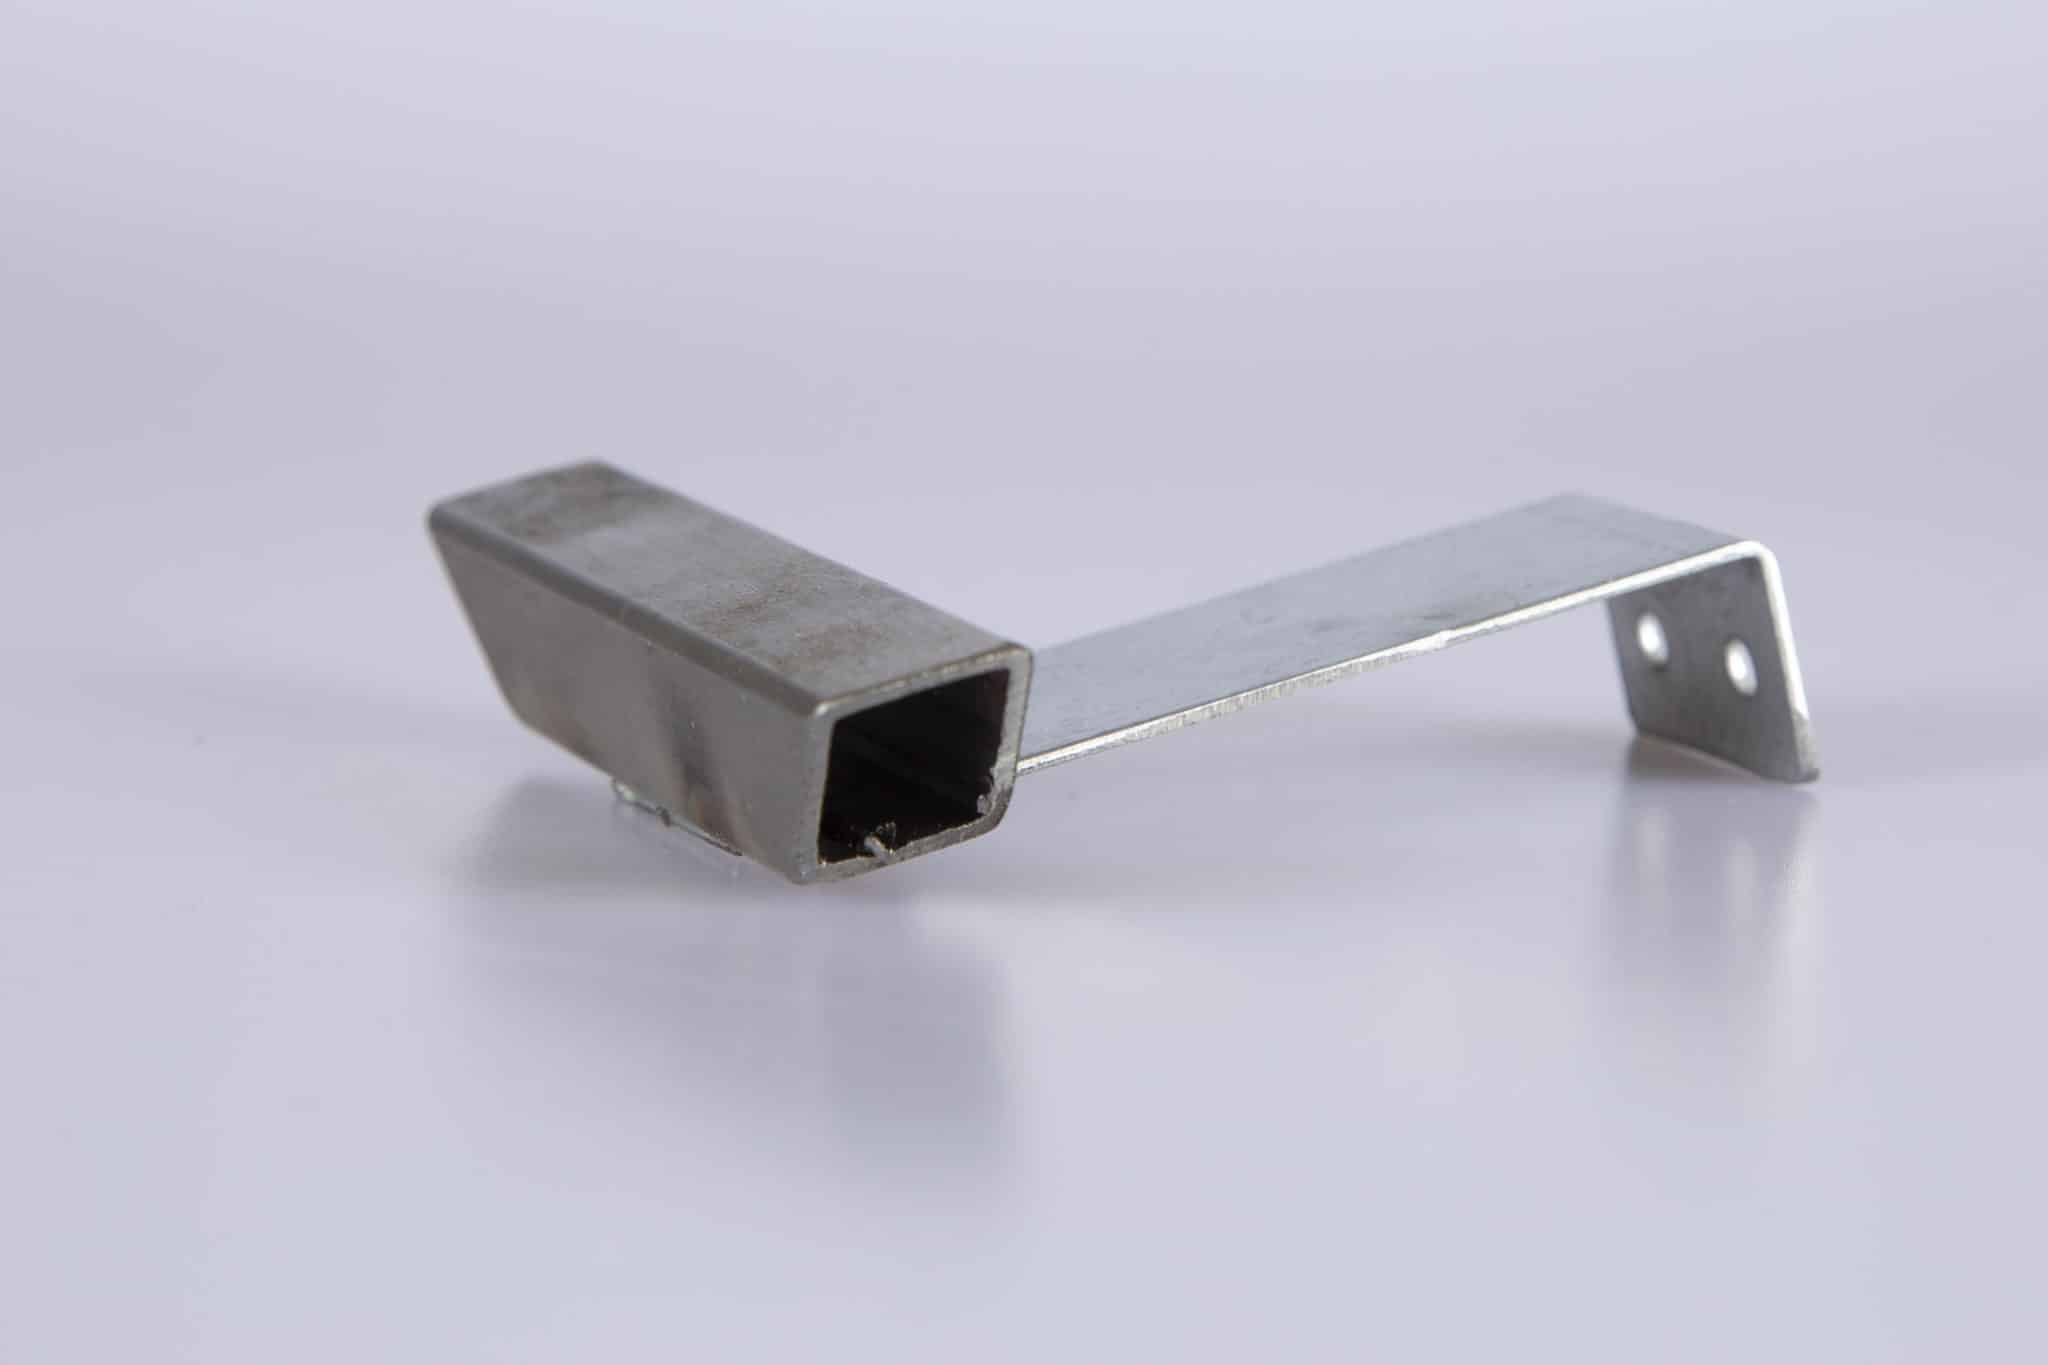 Archway Replacement Gas Burner Cross Lighting Tube (15mm SQ) for our line of gas griddles